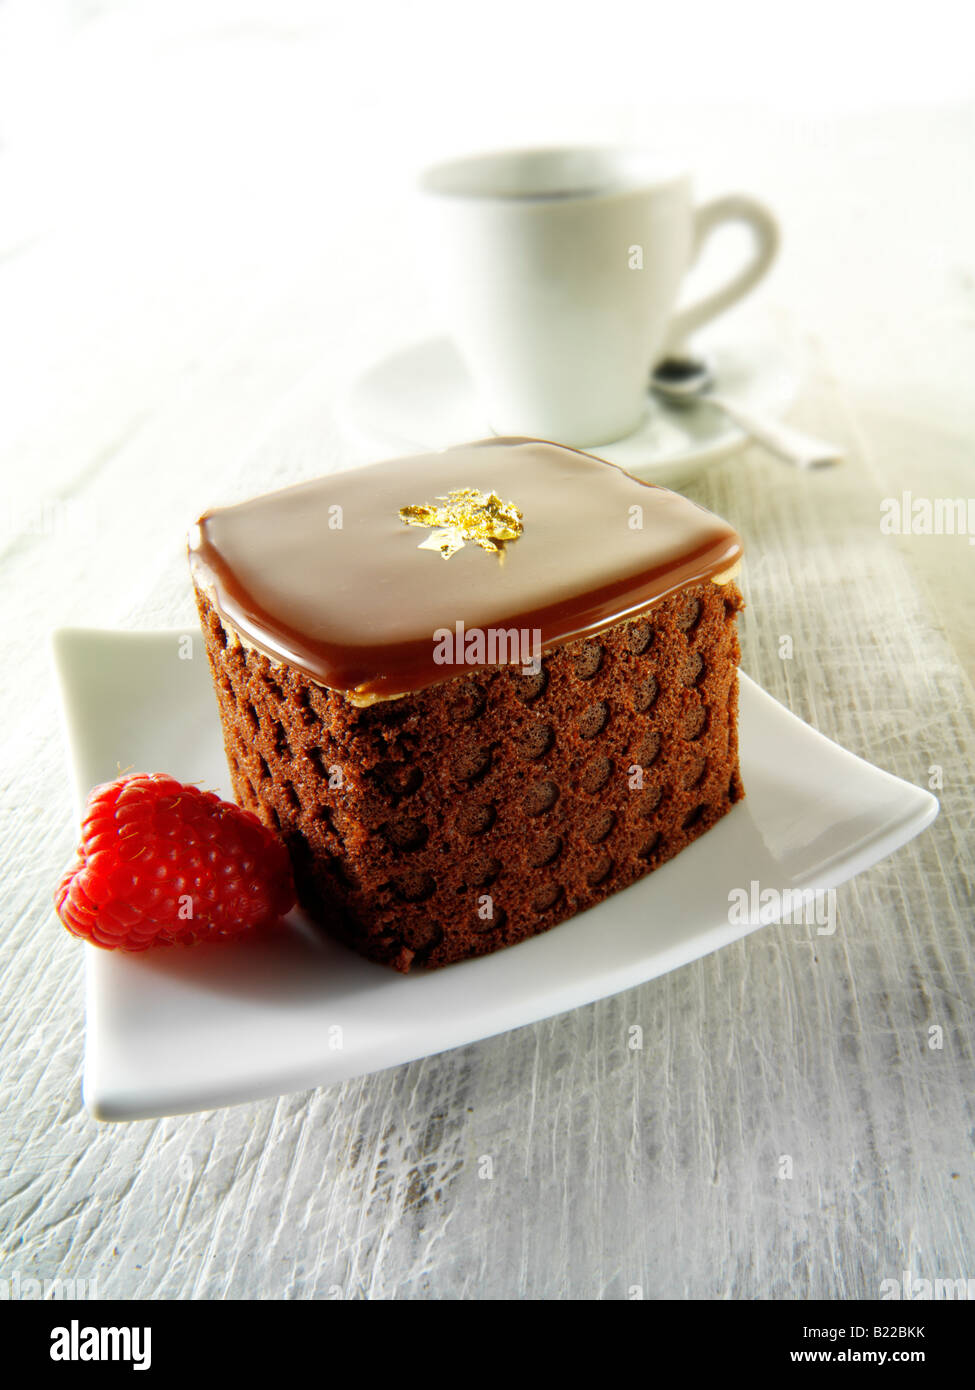 A hand made patisserie speciality rich indulgent chocolate cakes with coffee in a white setting Stock Photo